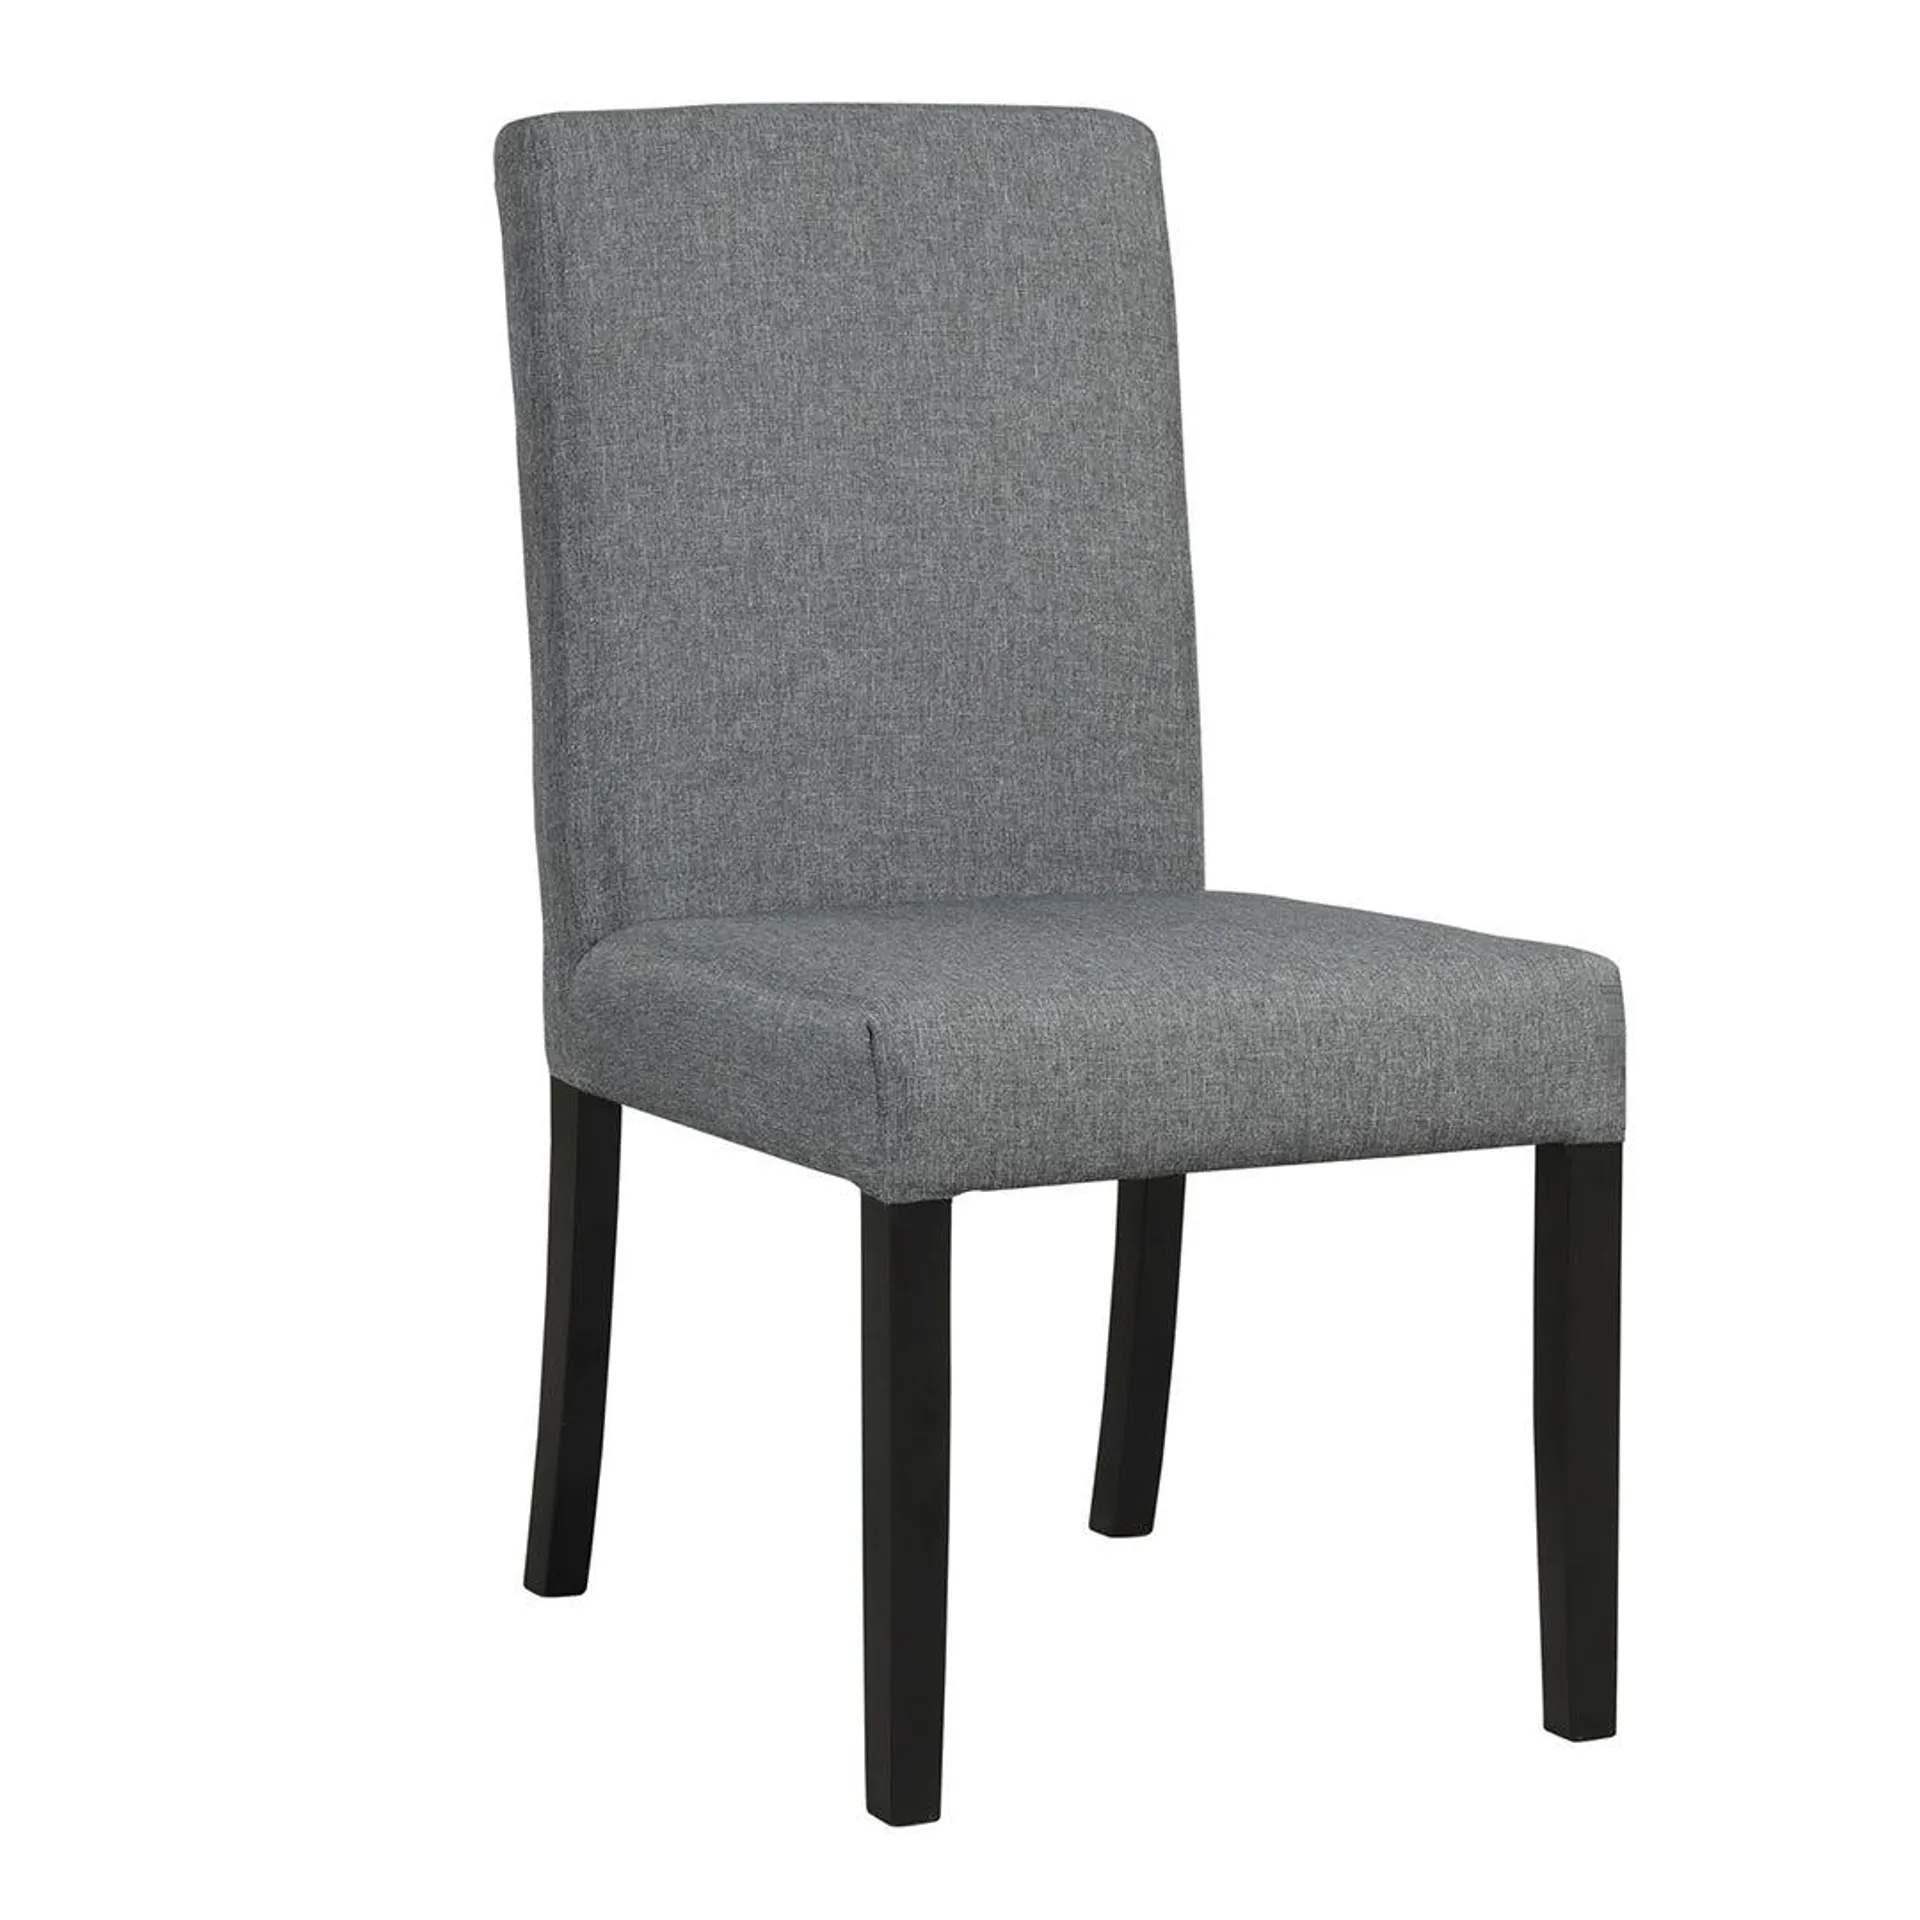 Parson Dining Chair (2 colors)